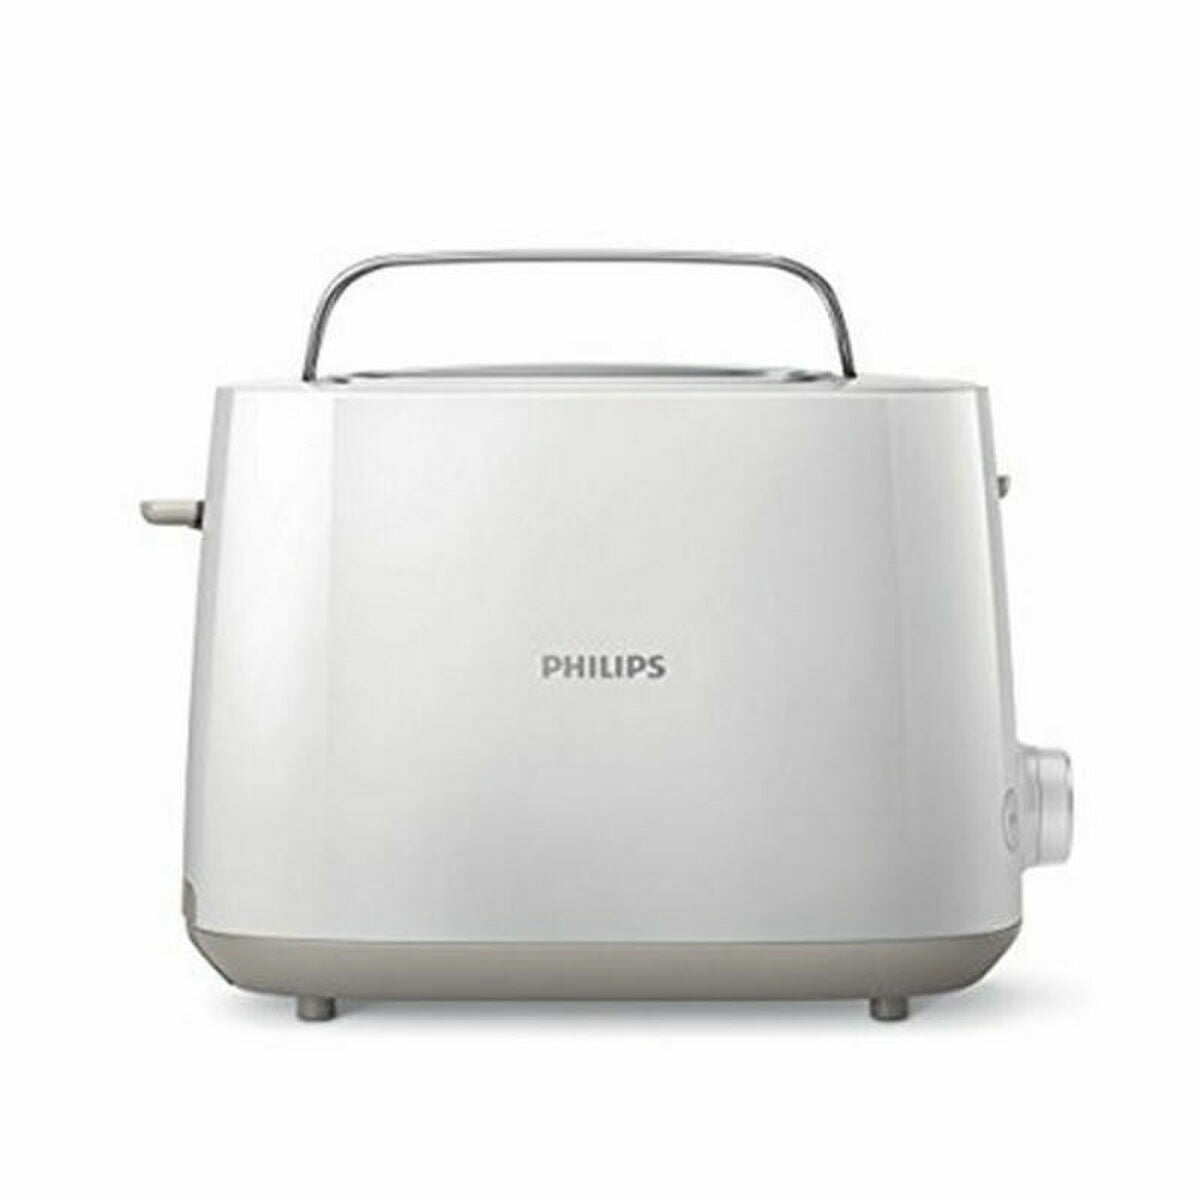 Toaster Philips HD2581 2x White 830 W.